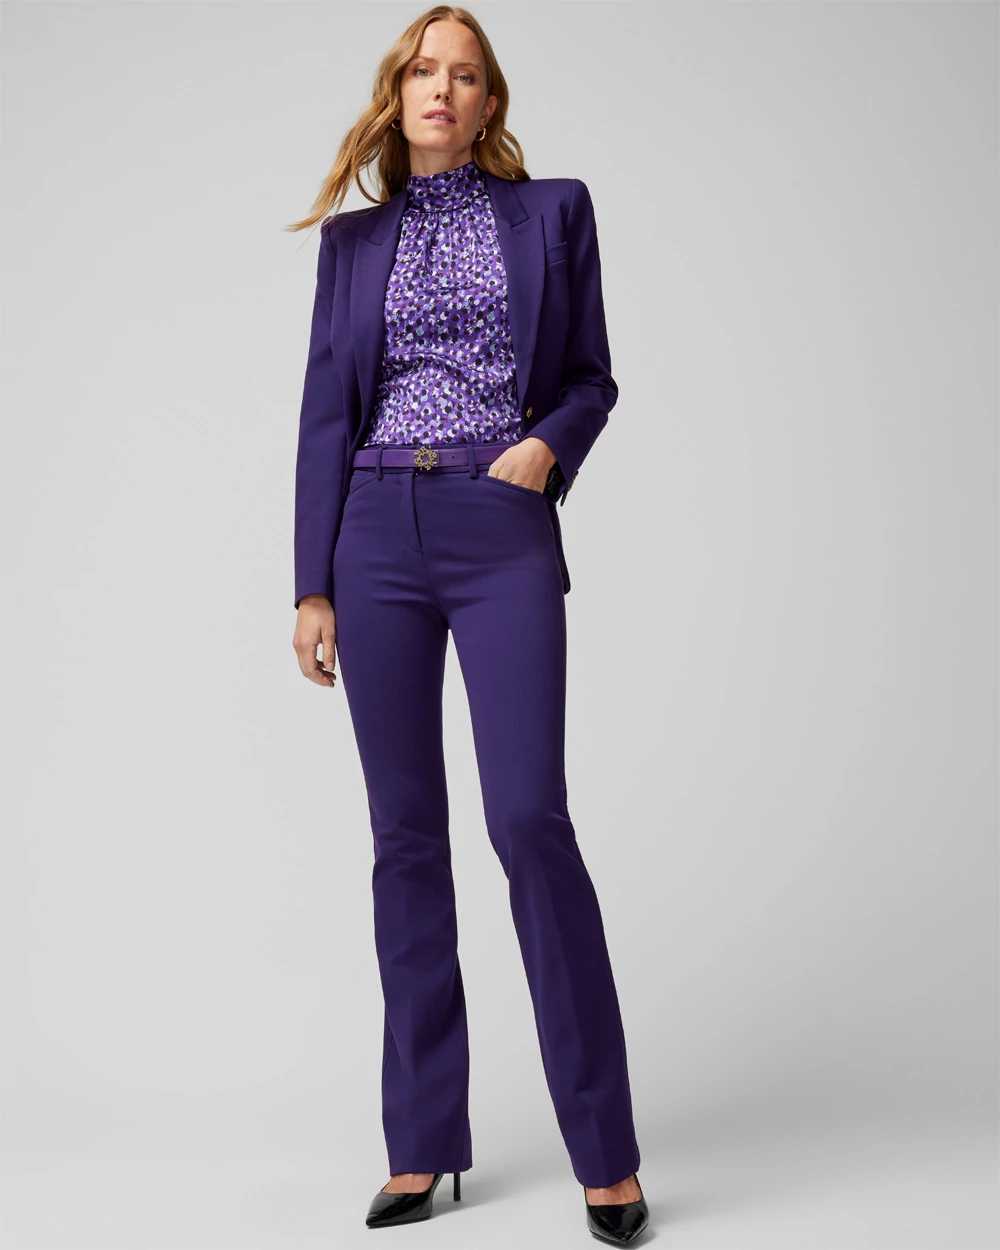 WHBM® Ines Slim Bootcut Luxe Stretch Pant click to view larger image.